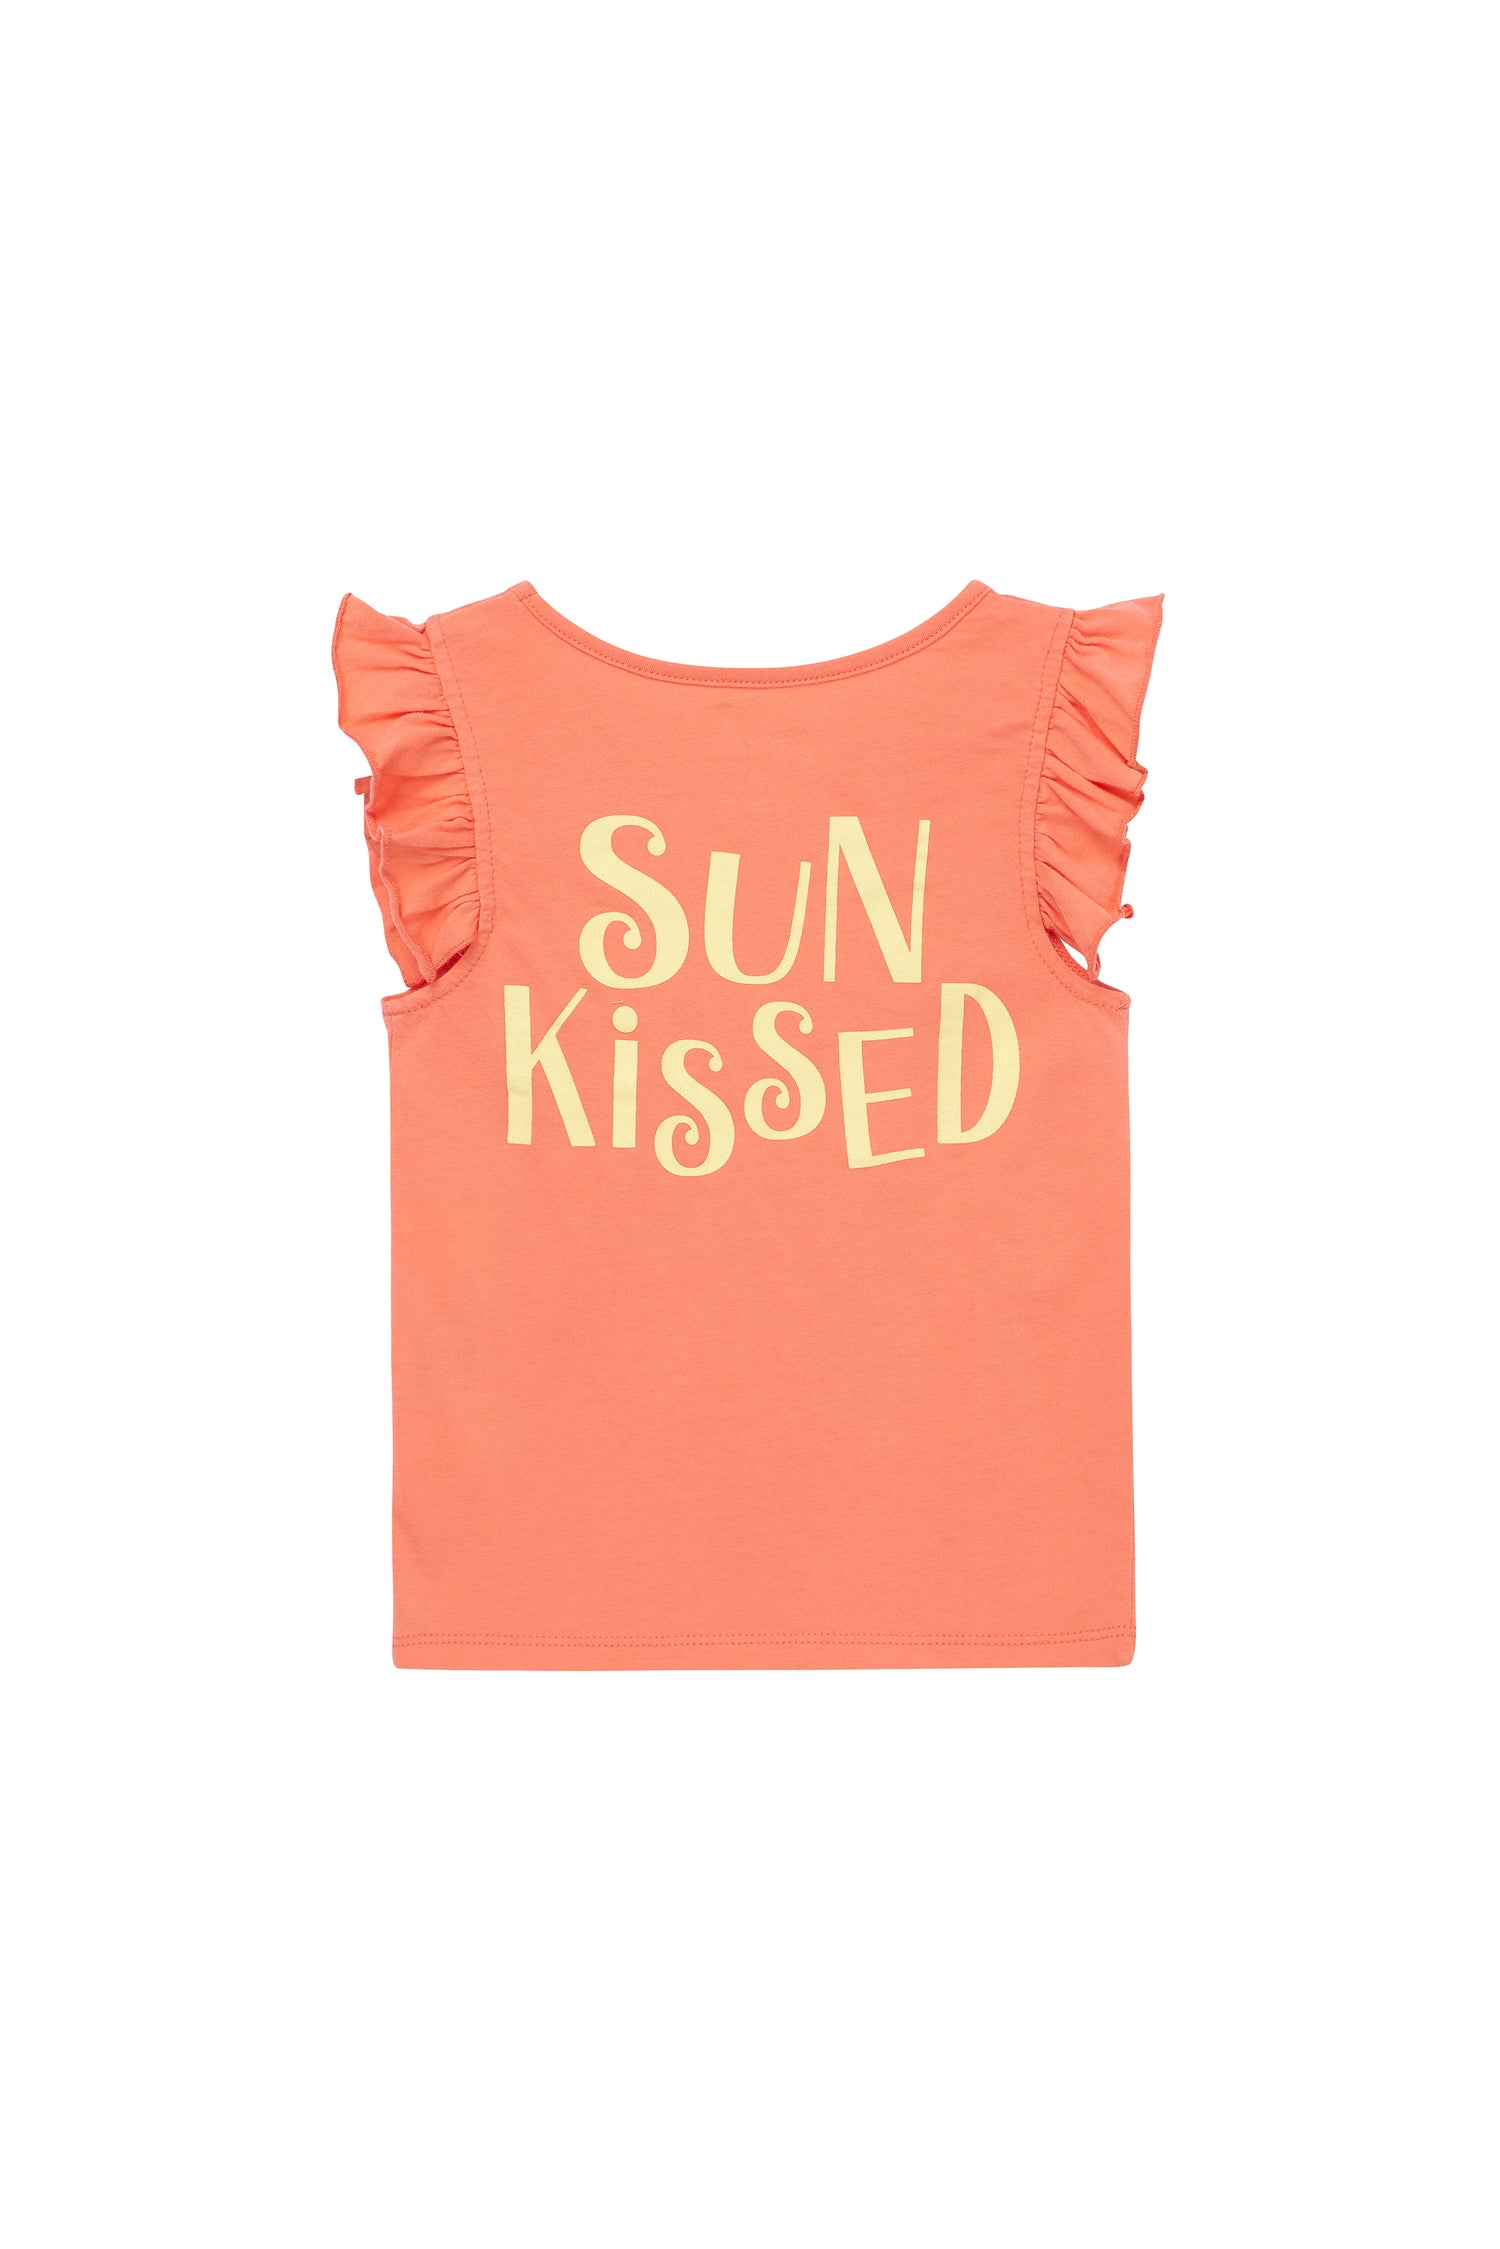 BACK OF ORANGE T-SHIRT WITH "SUN KISSED"